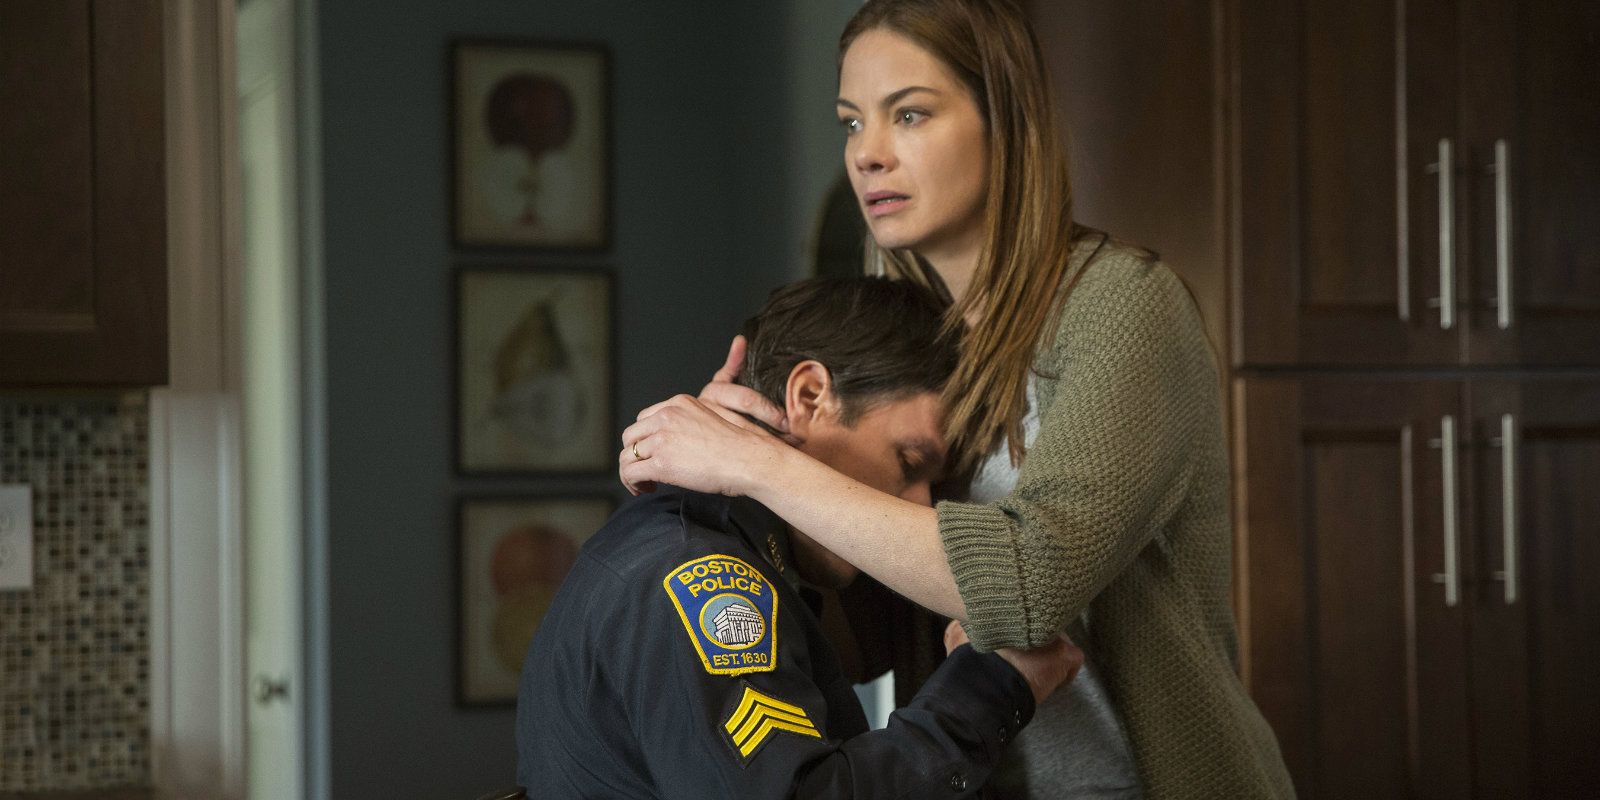 Patriots Day - Michelle Monaghan hugging a Boston PD officer